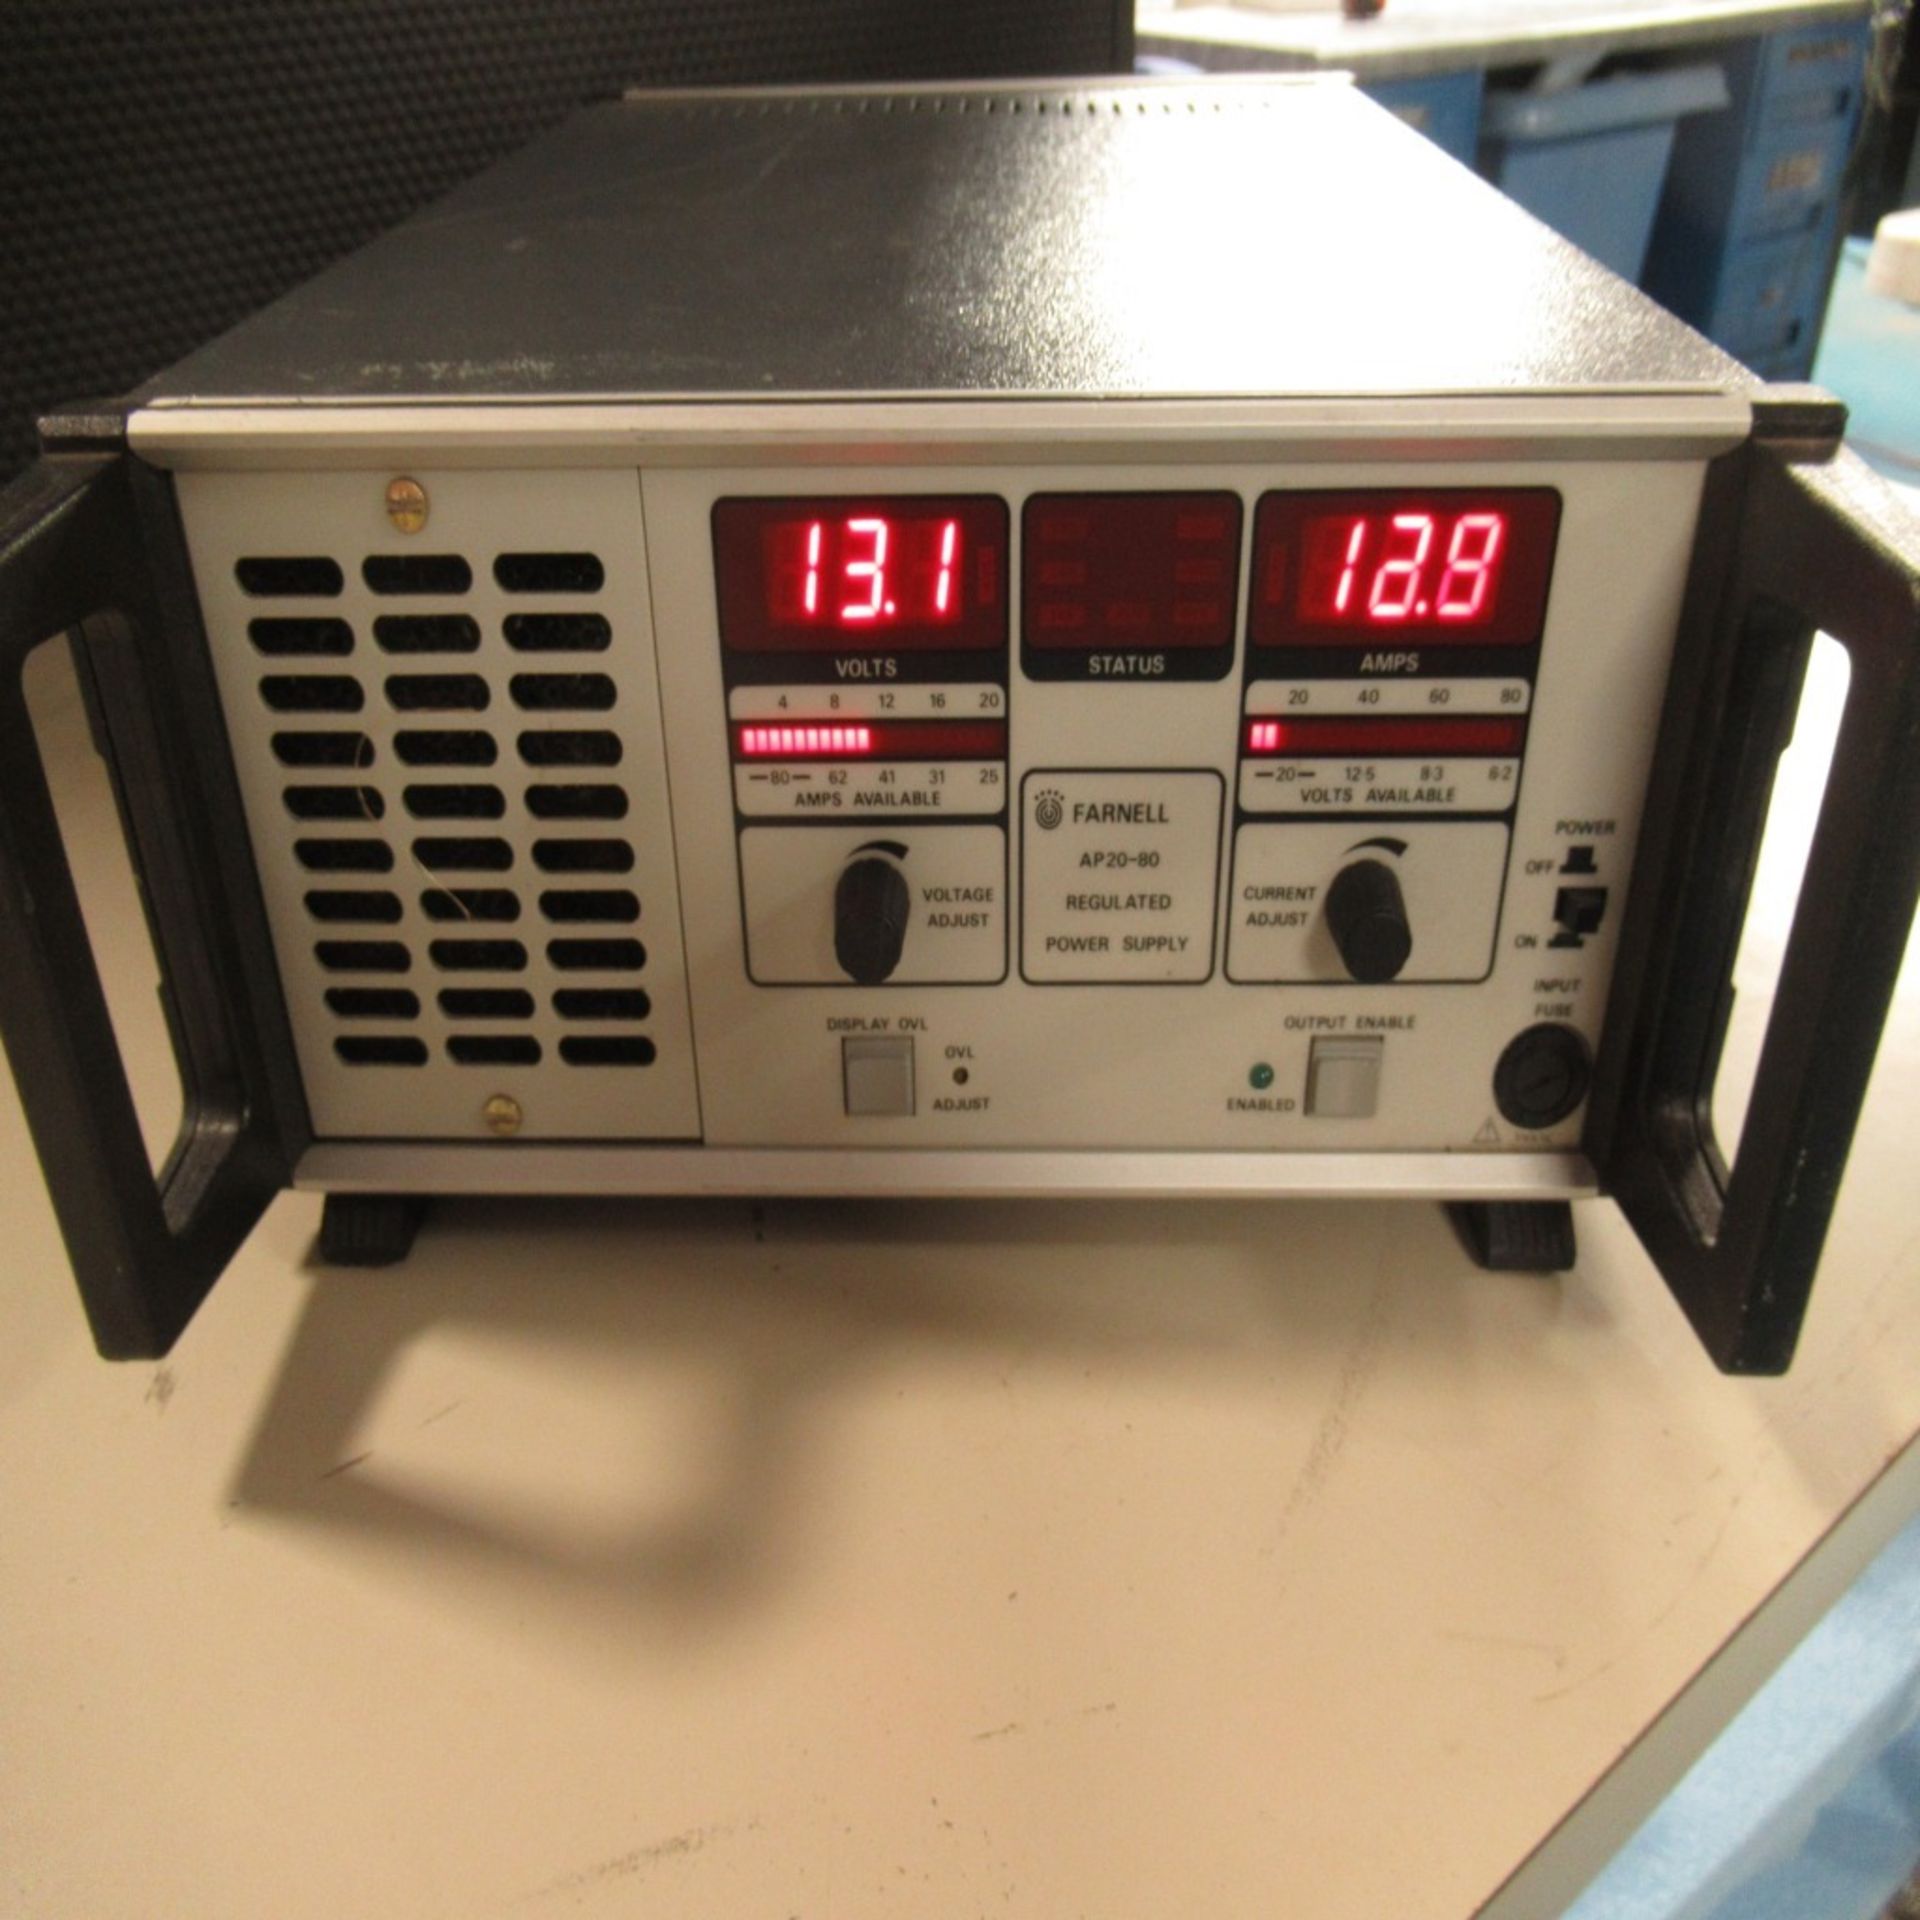 PHOTON SNAP SHOT MODEL 6000 *POWERS ON* NO SCREEN DISPLAY; FARNELL AP20-80 REGULATED POWER SUPPLY * - Image 11 of 222